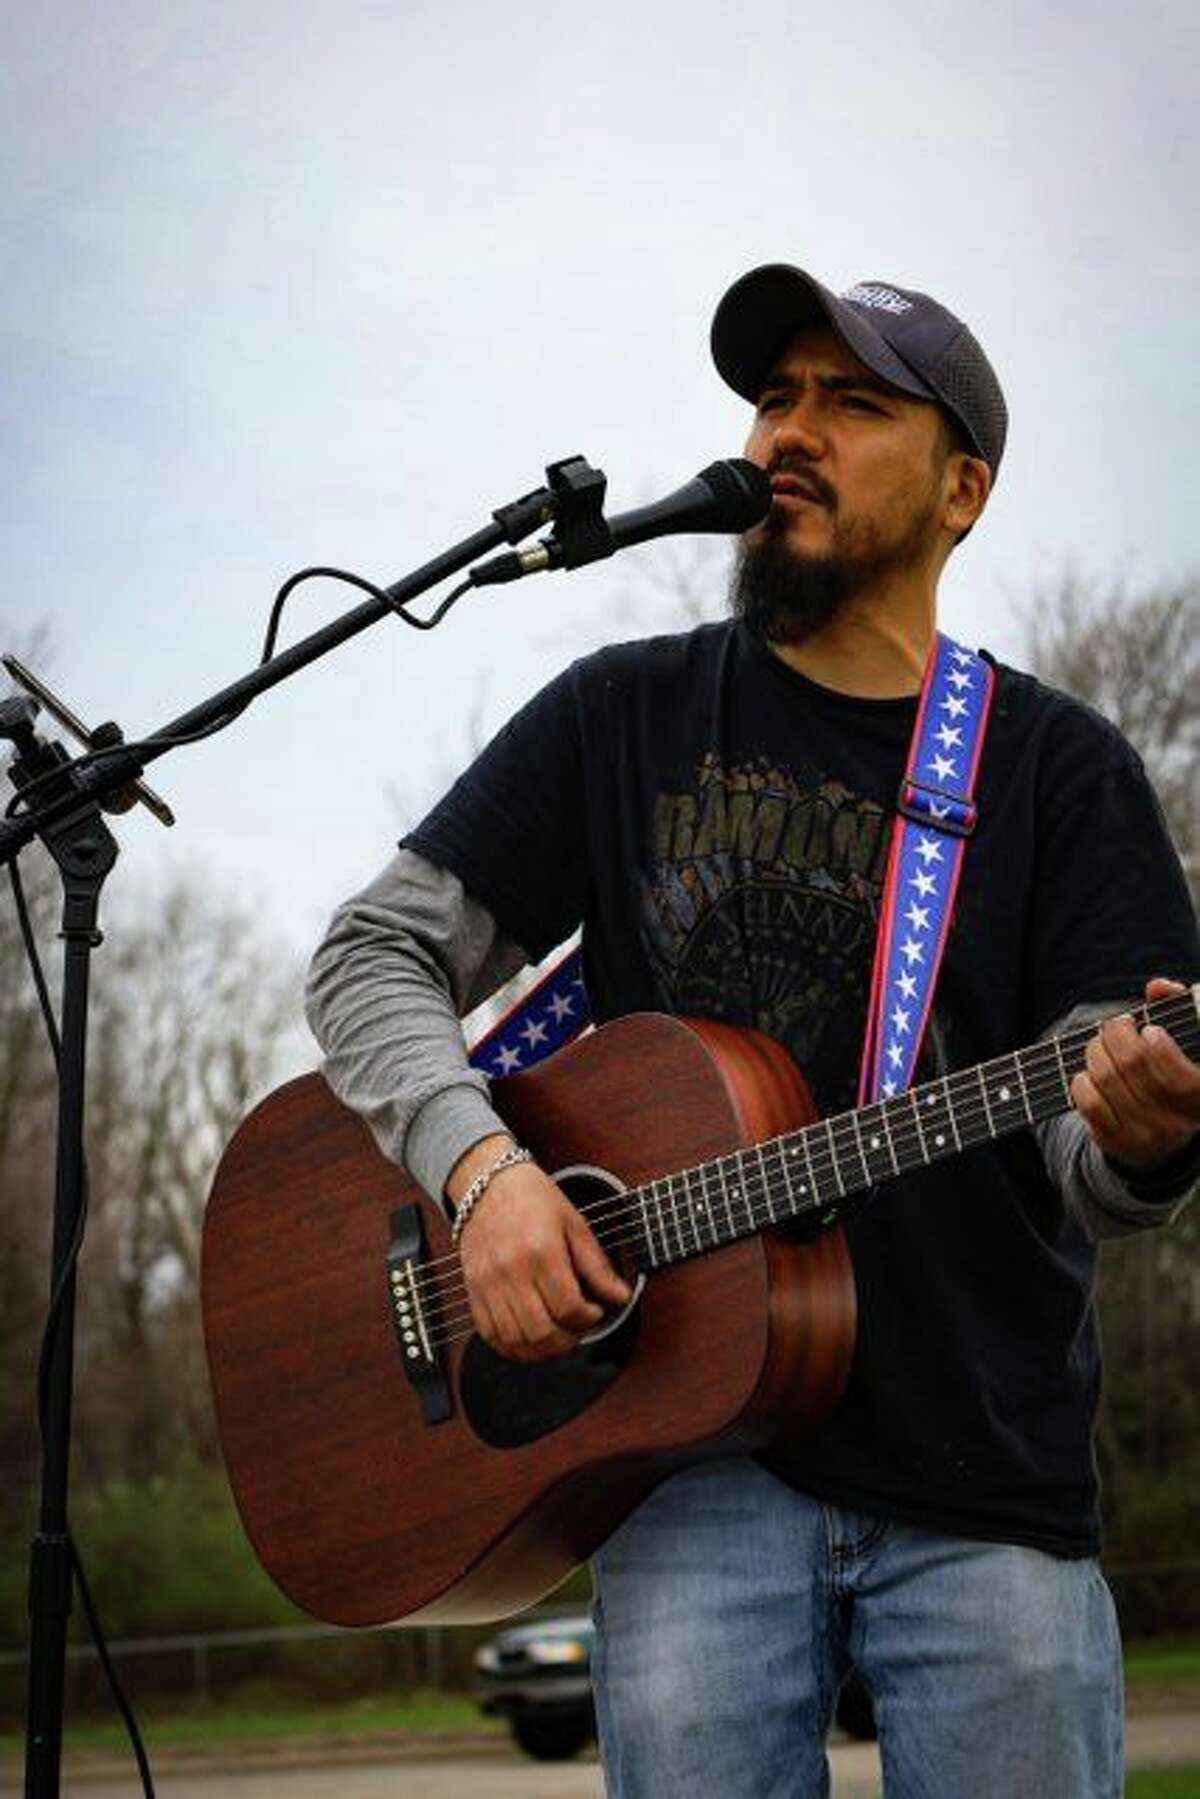 Antonio Aguilar is a musician with a passion for art, who can often be found around Reed City playing his tunes for any passerby to listen to.